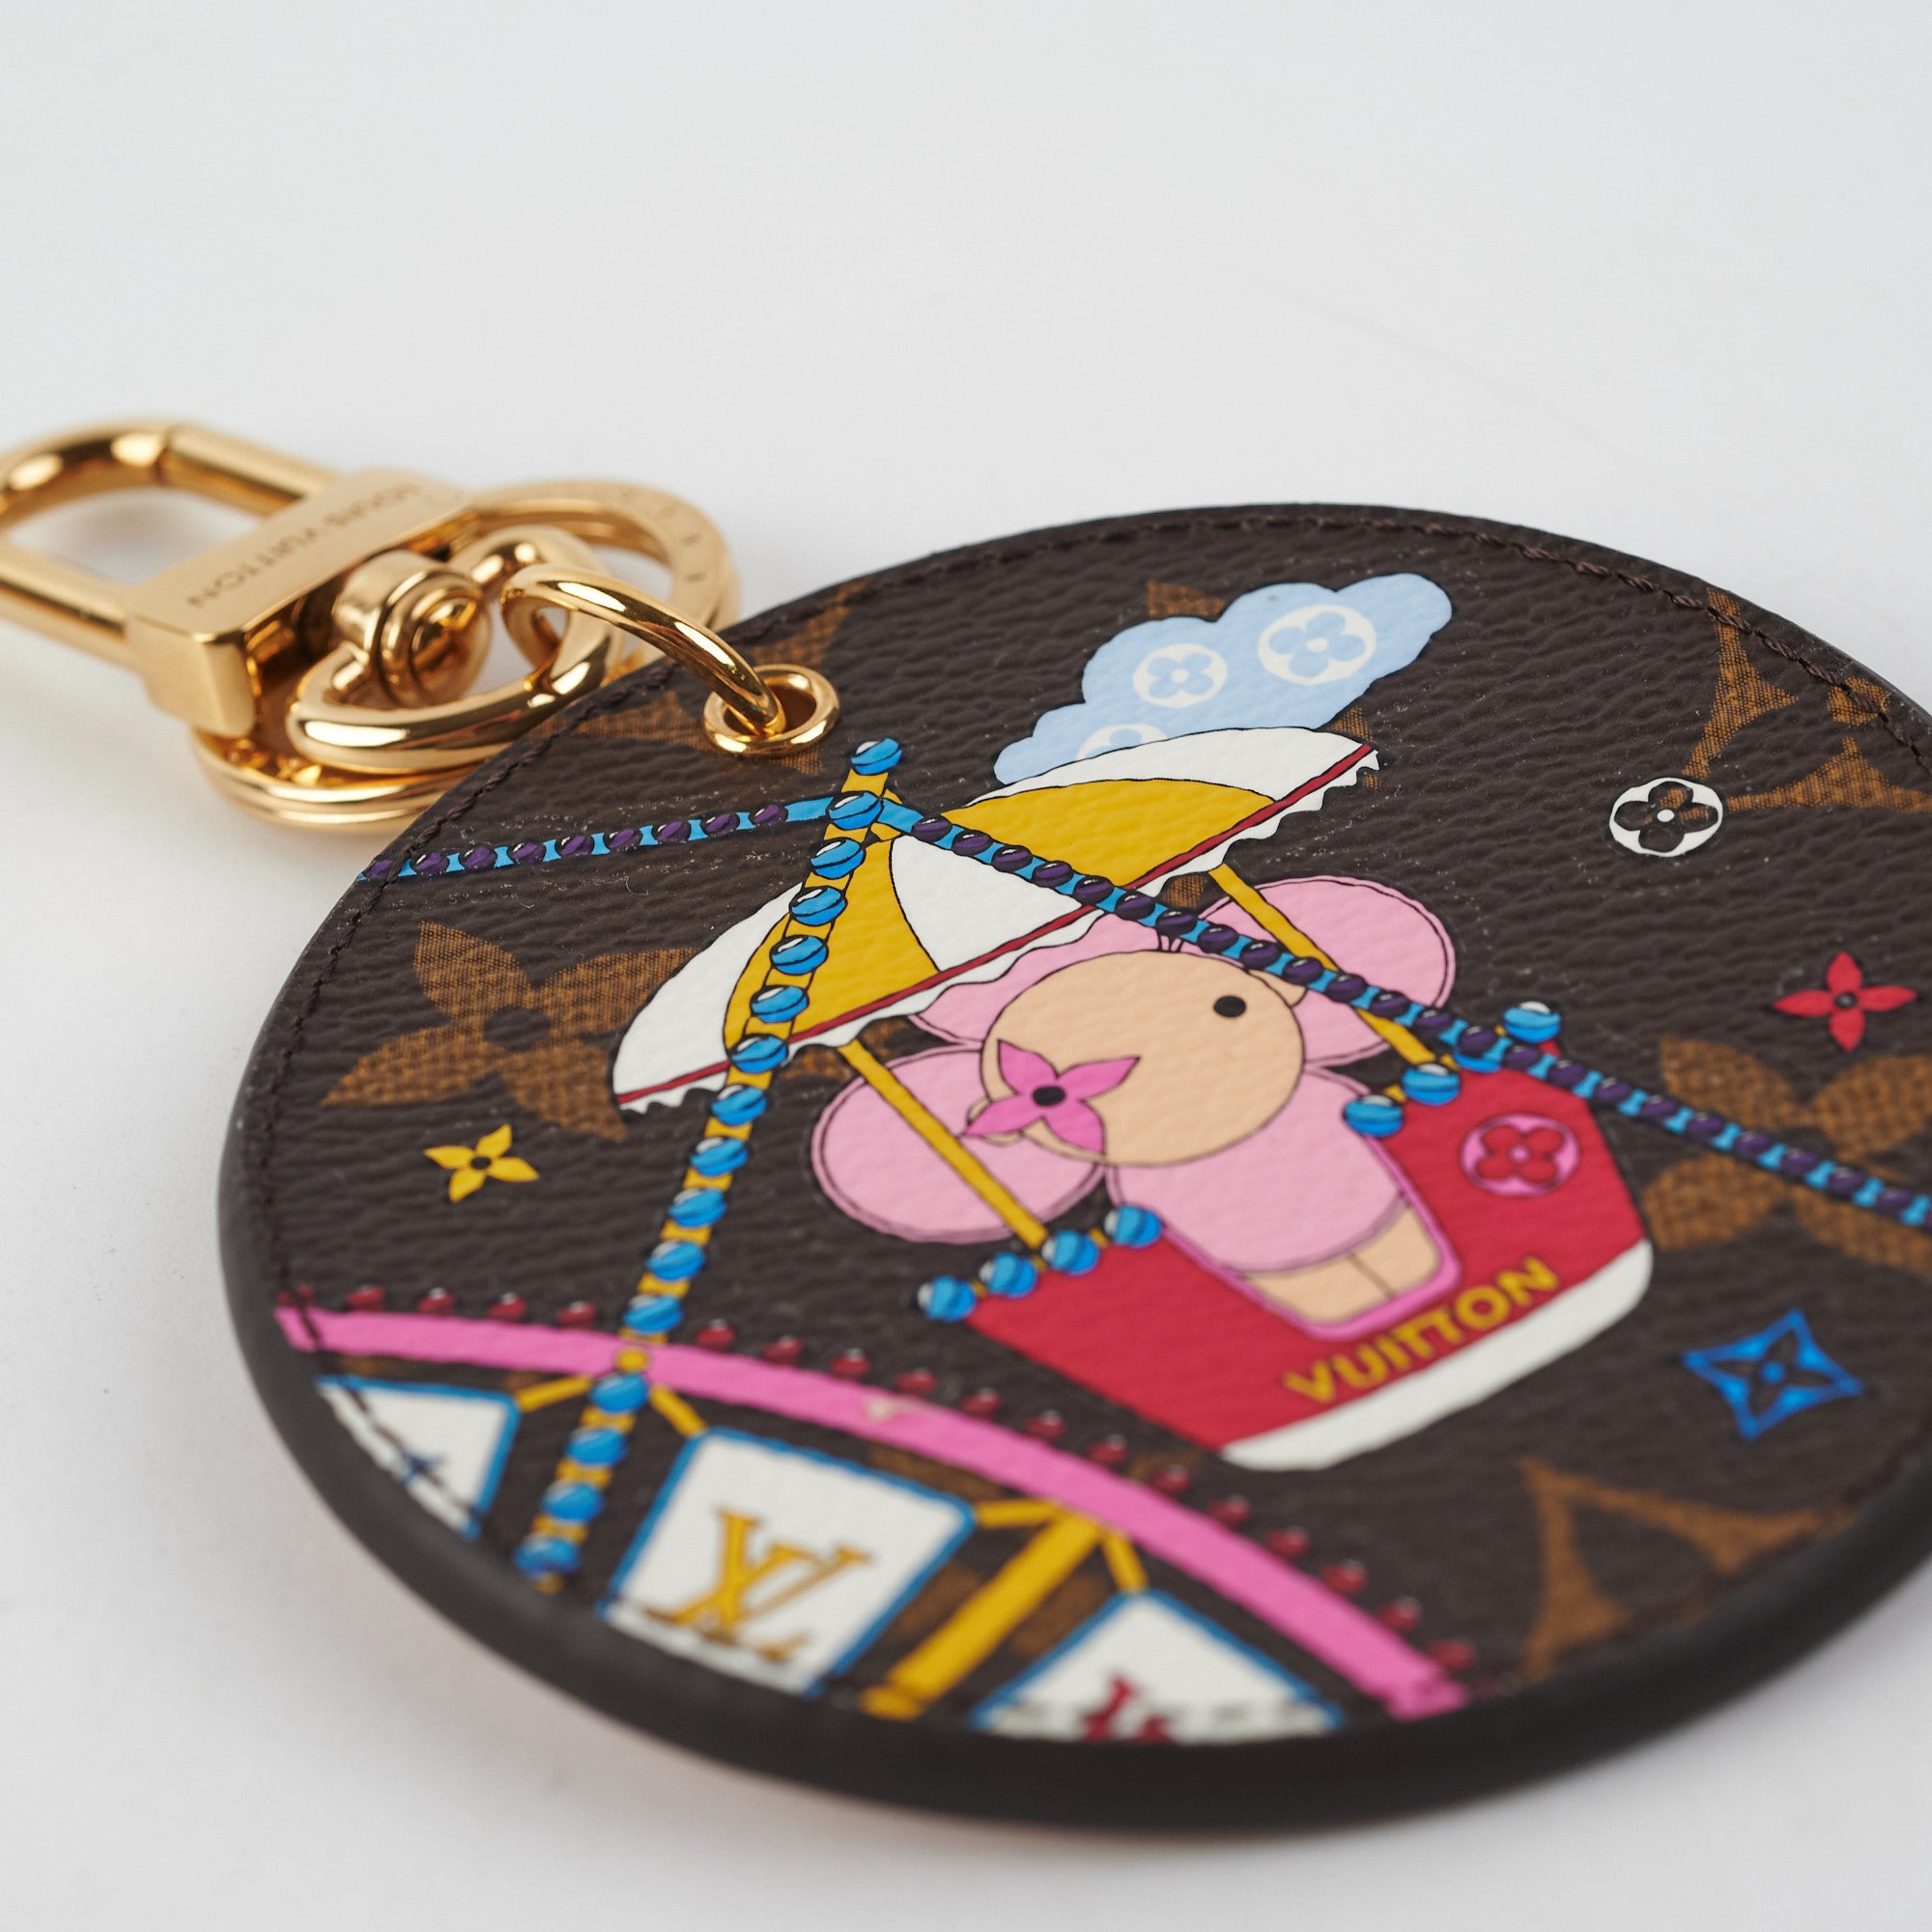 Shop Louis Vuitton Keychains & Bag Charms (M01145) by lifeisfun